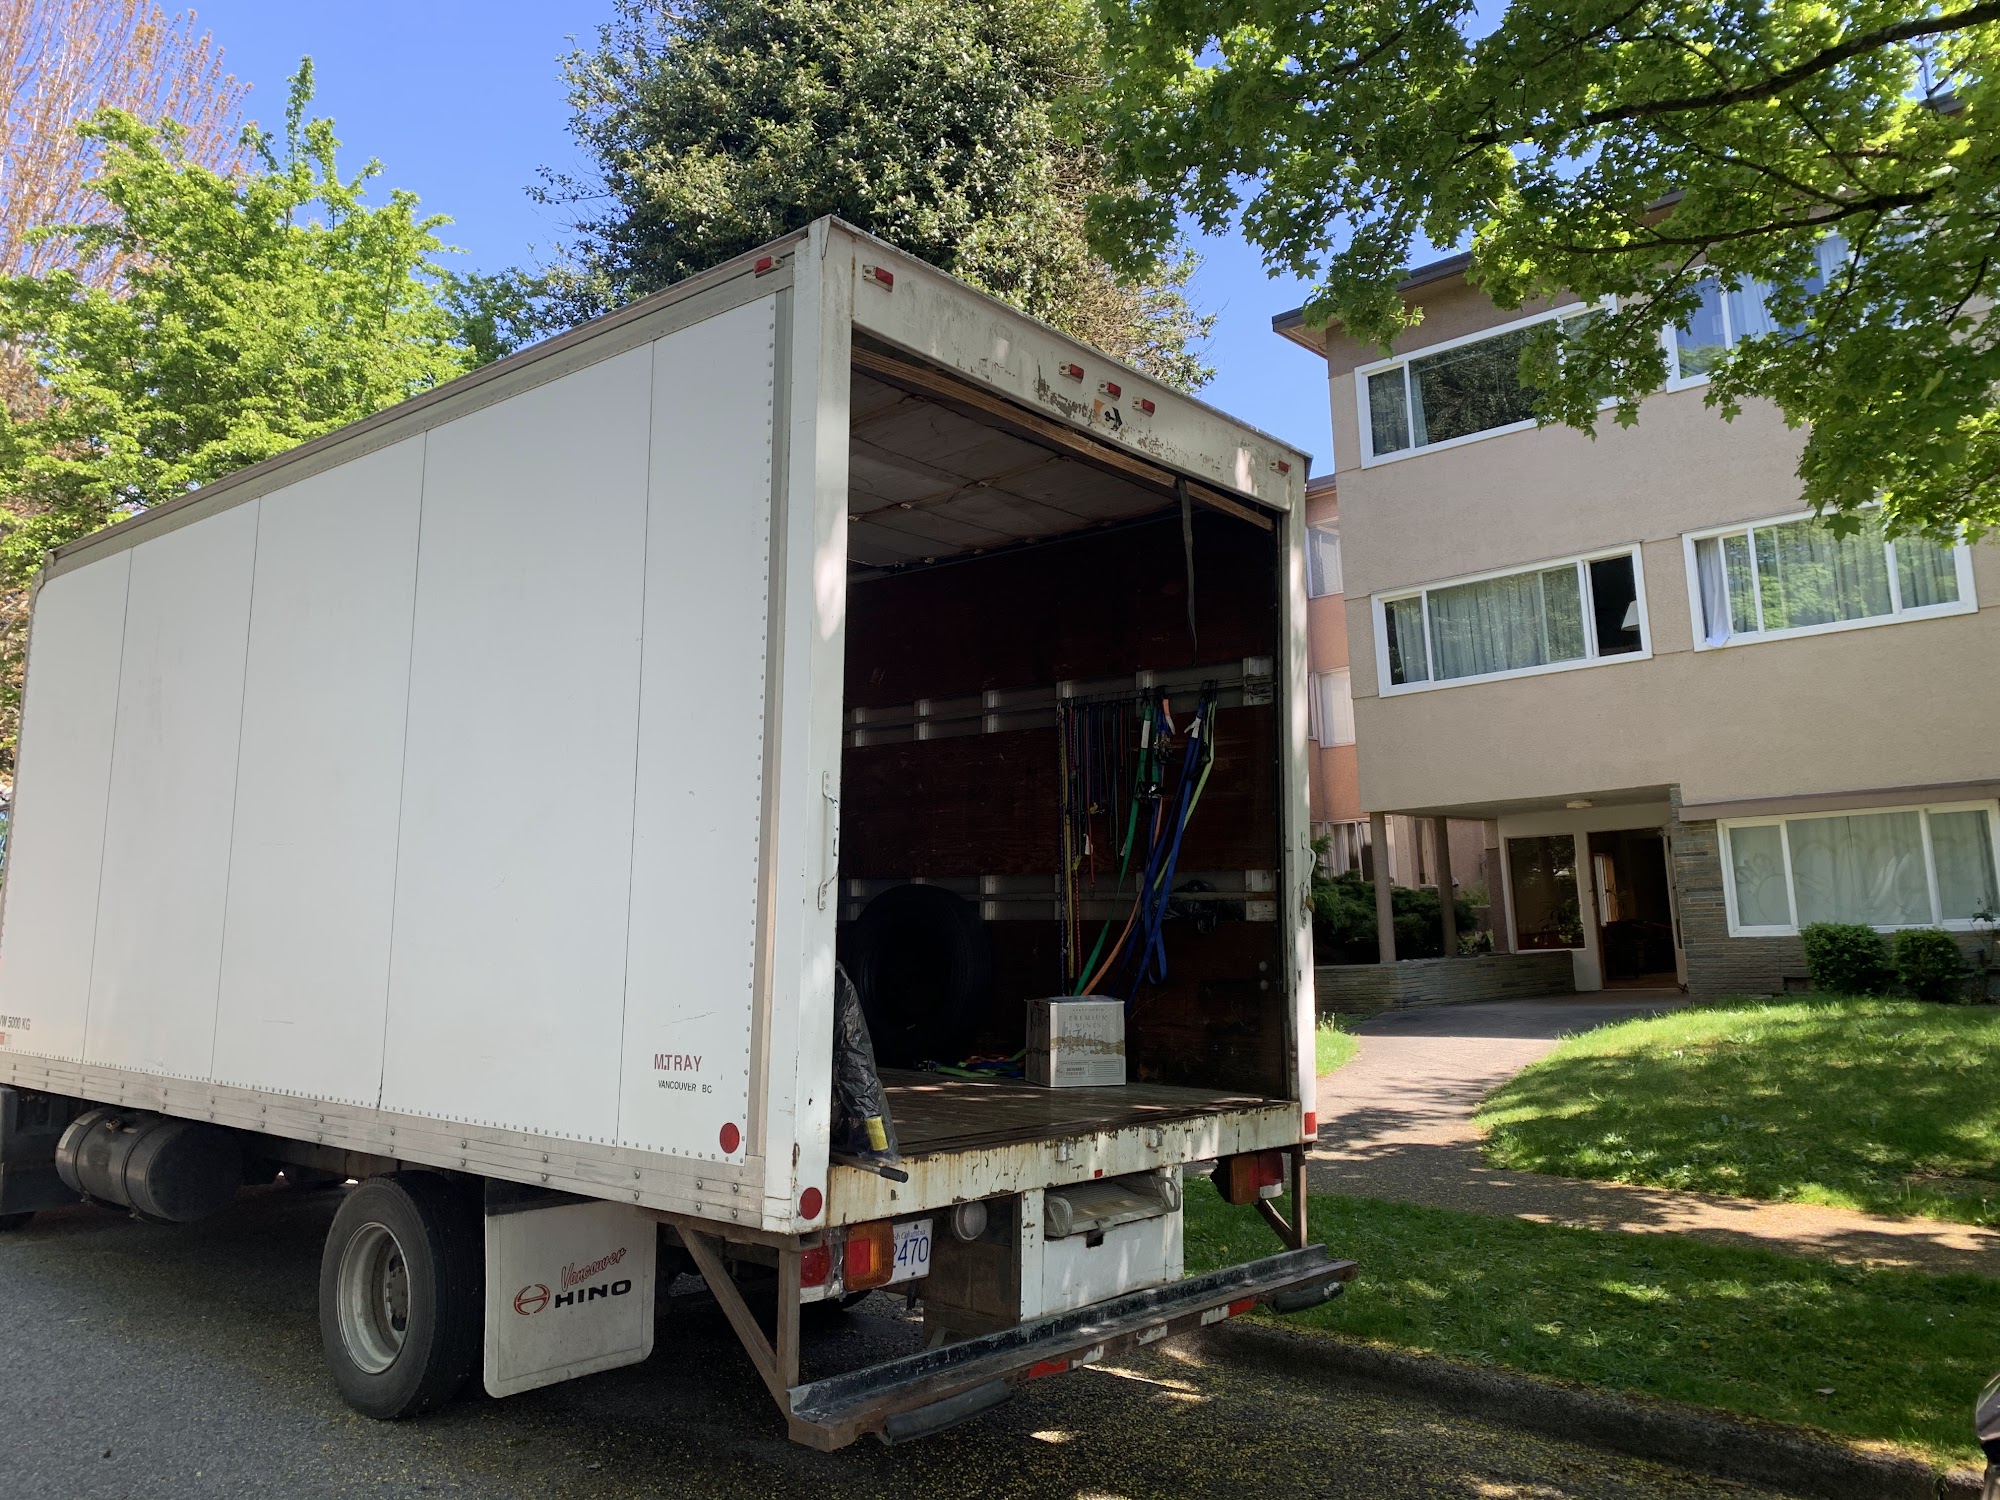 Vancouver Affordable Moving